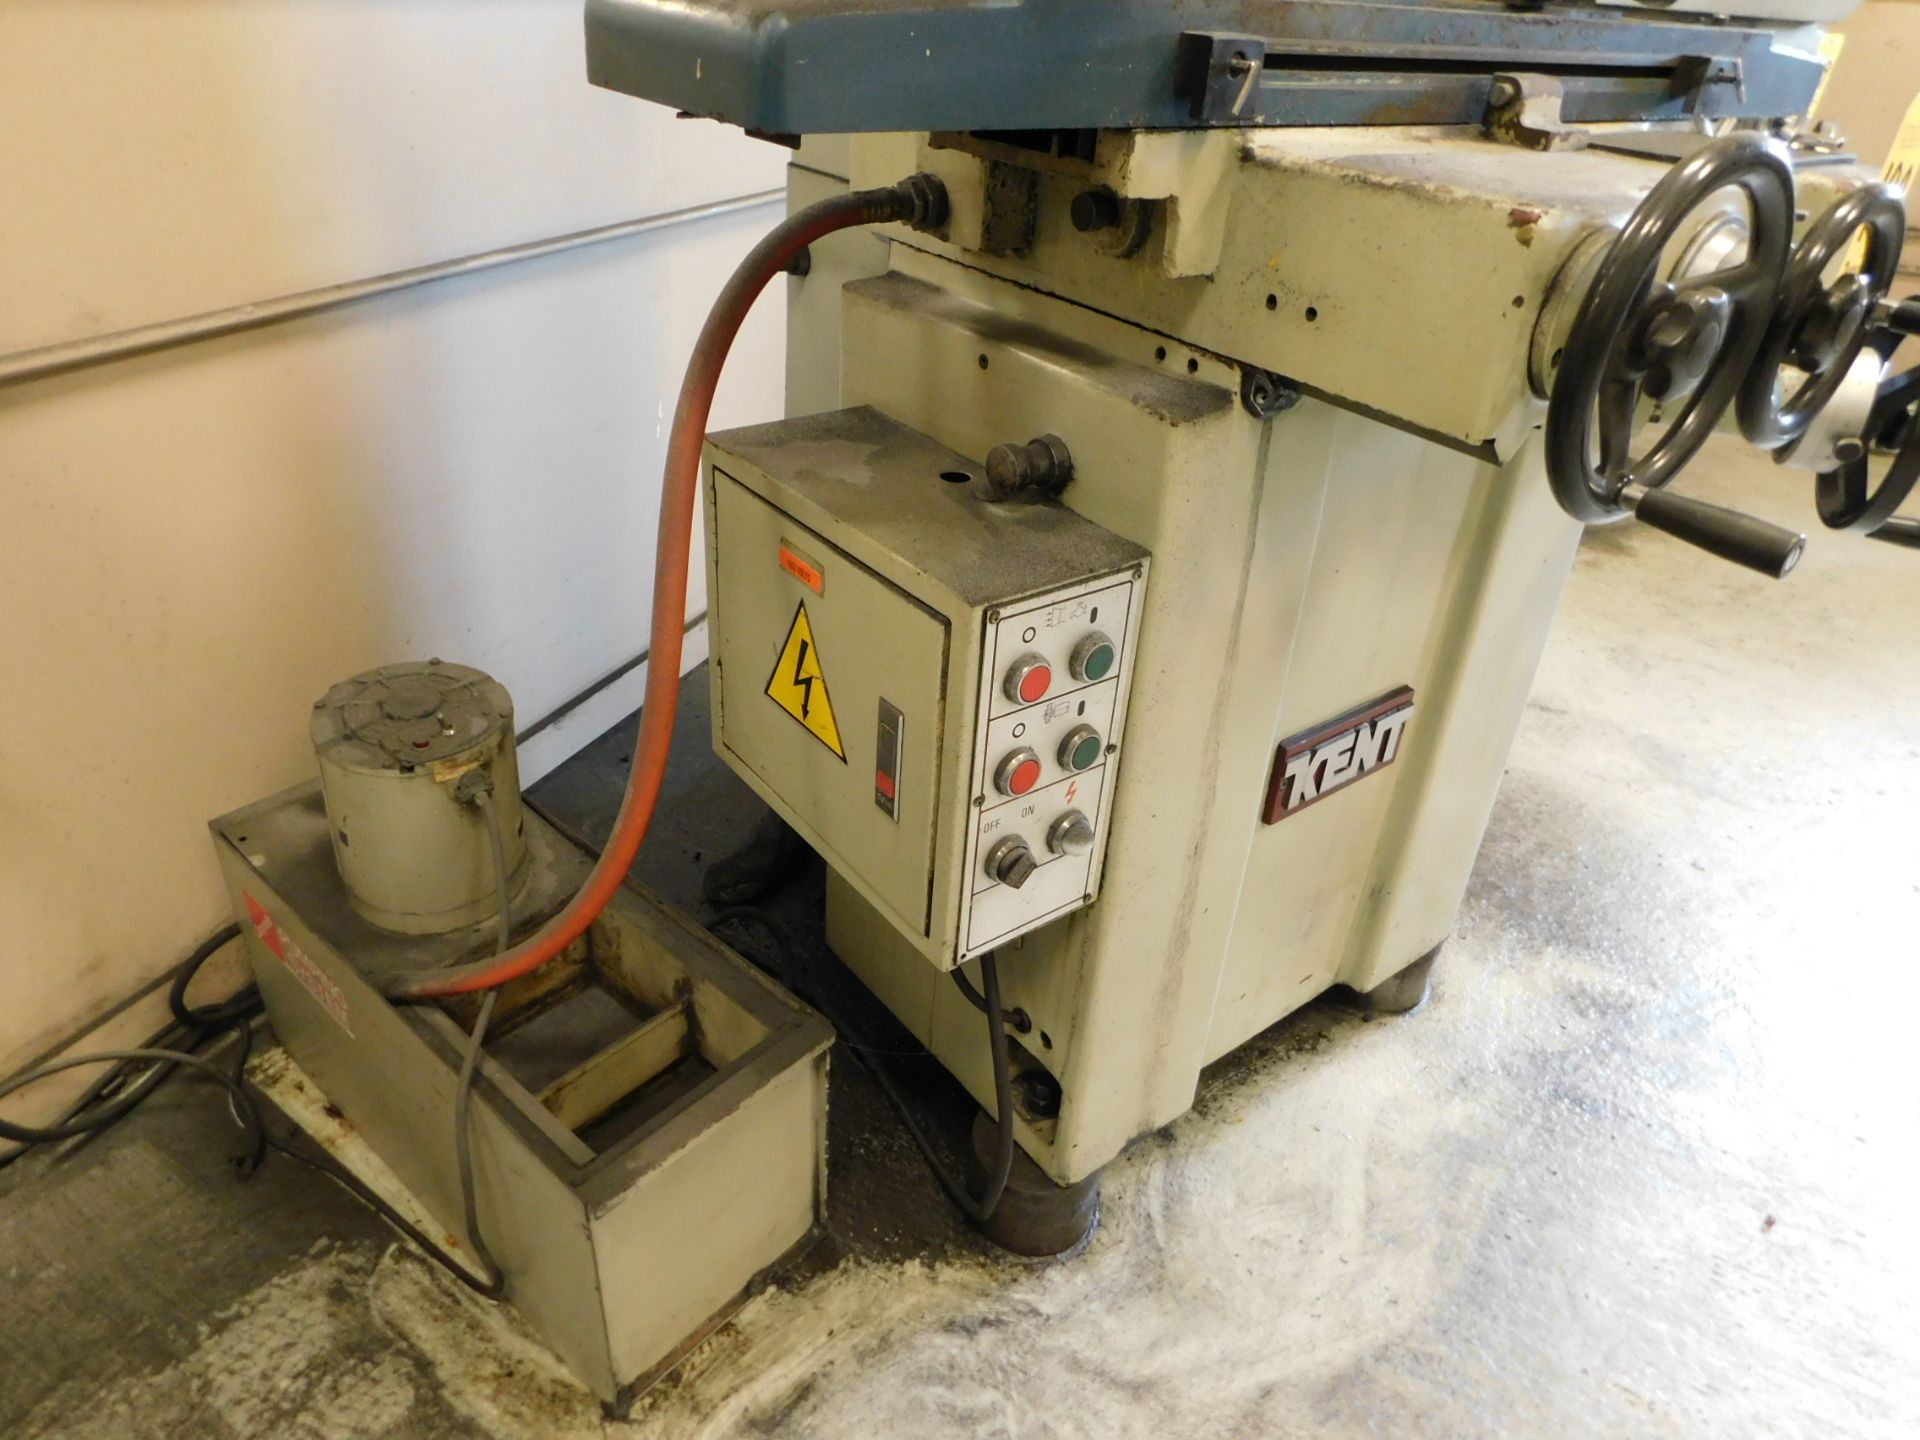 Kent Model KGS-200 Hand Feed Surface Grinder, s/n R941110-03, 6 In. X 14 In. Permanent Magnetic - Image 6 of 11